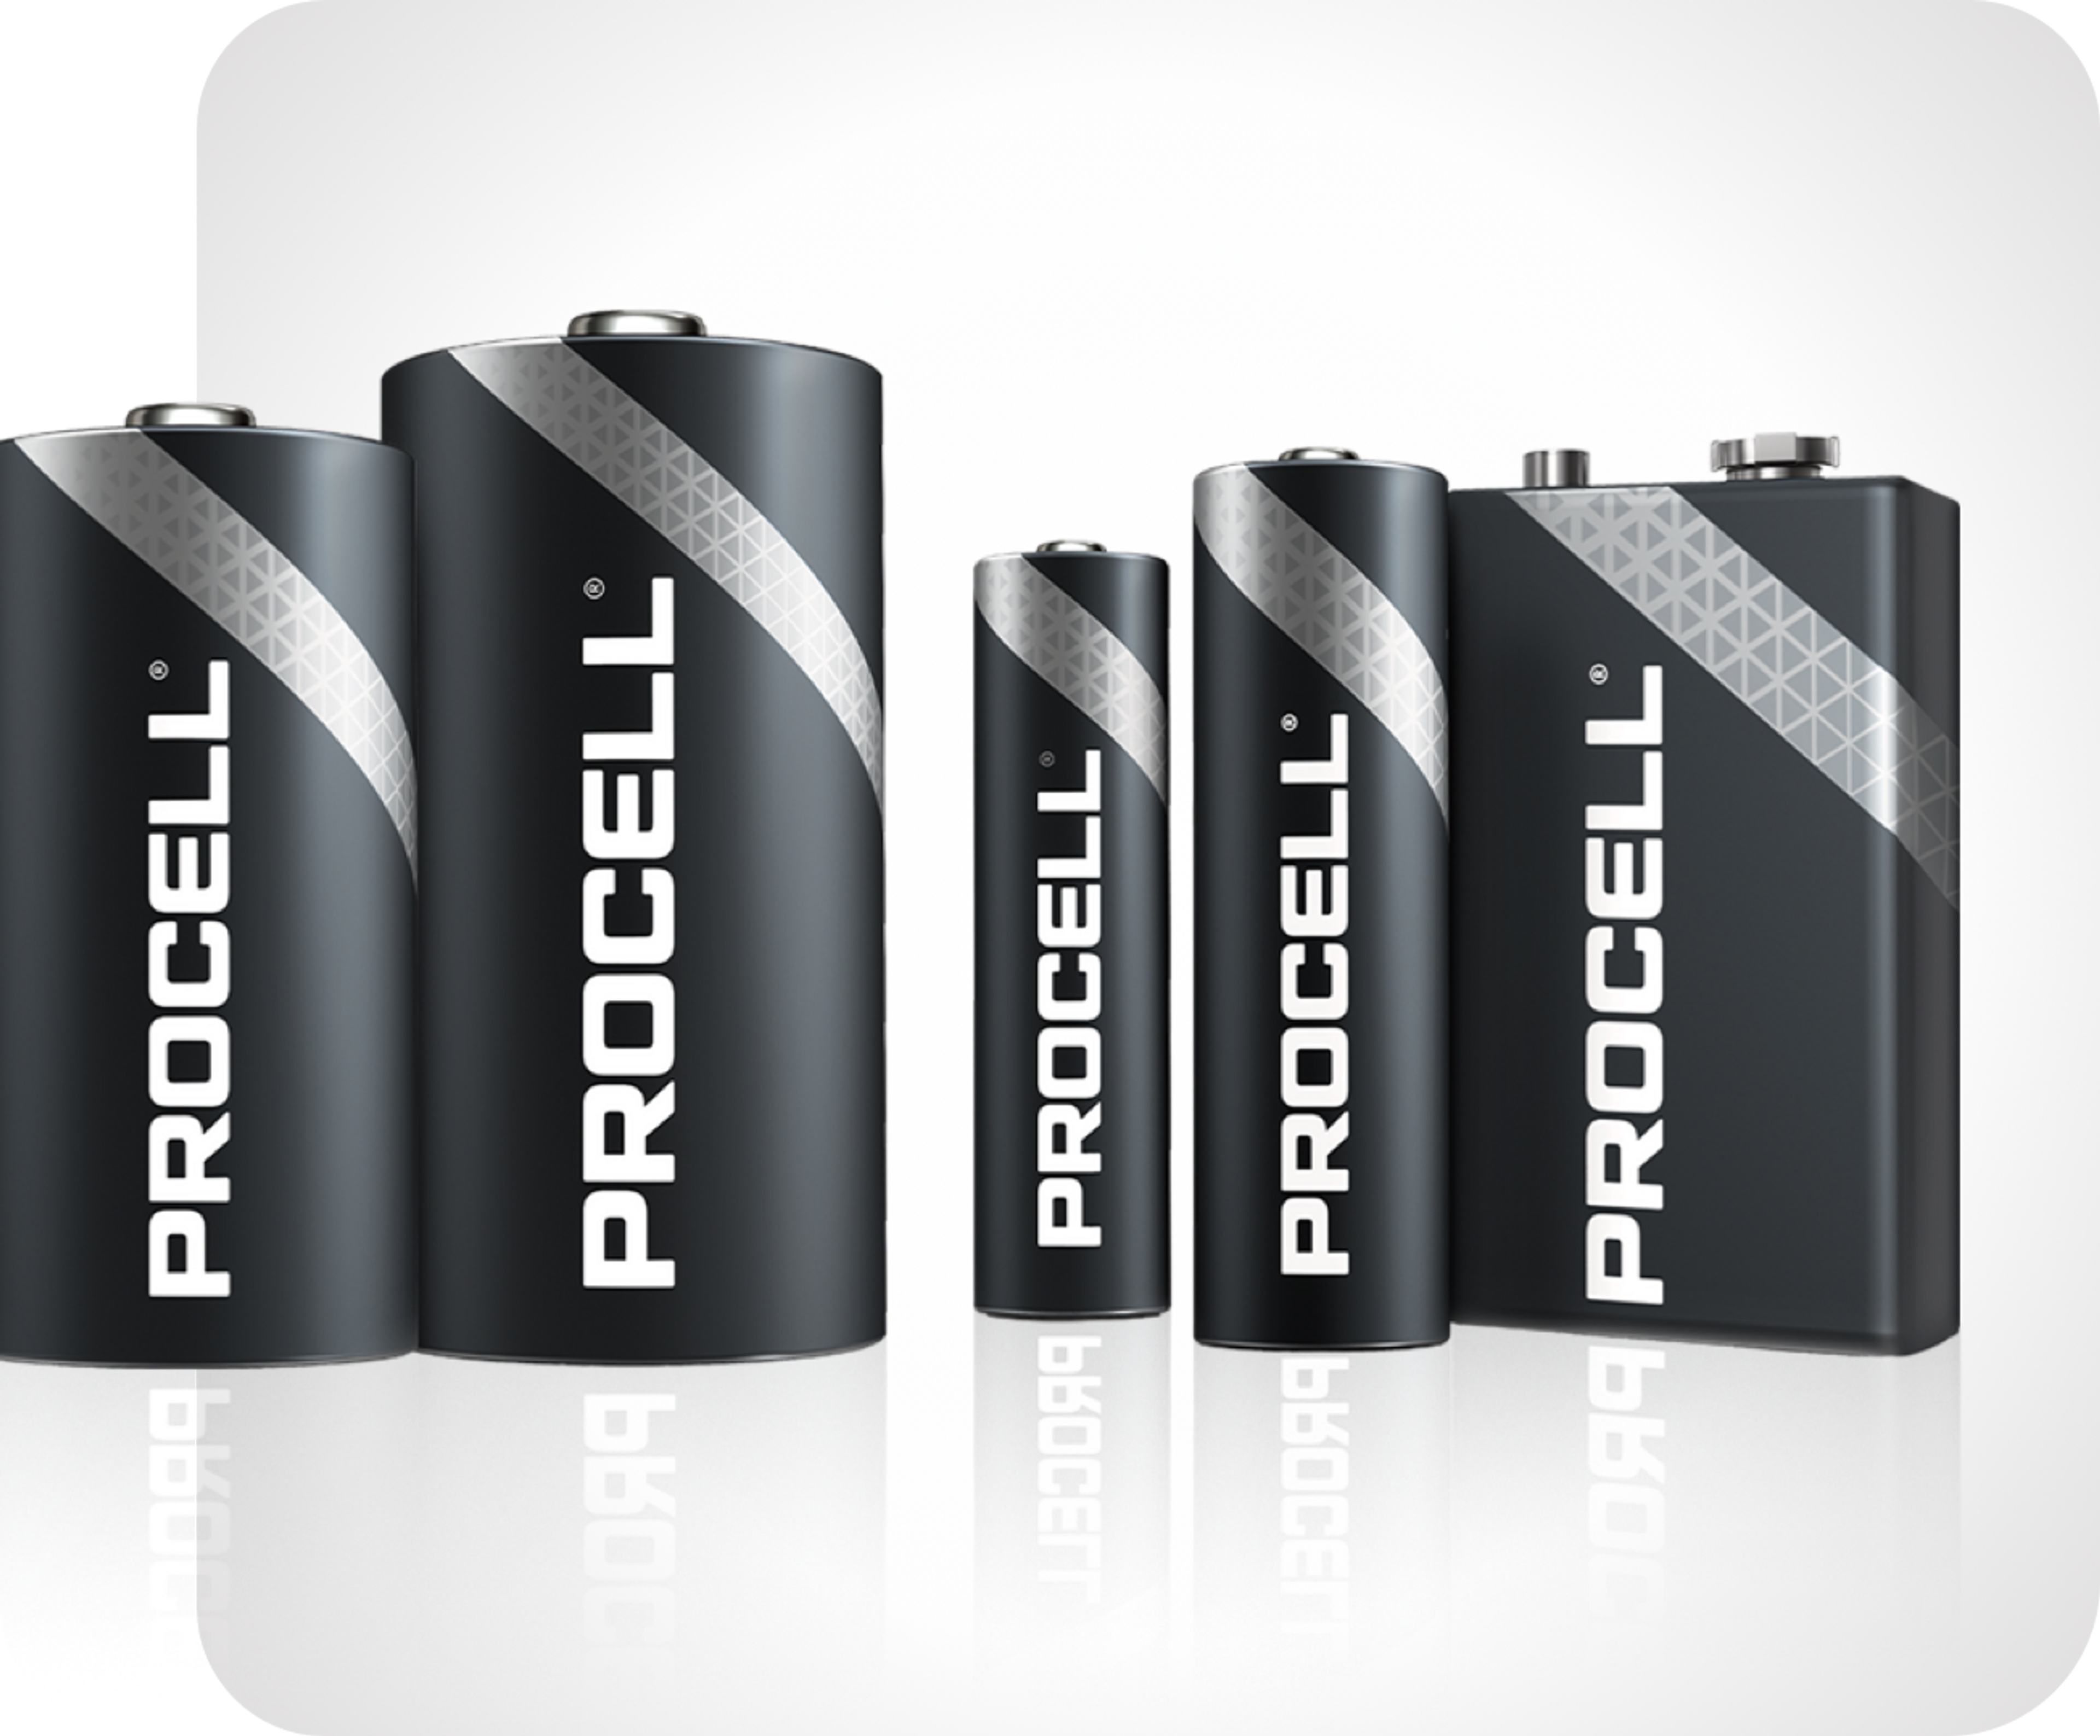 Image of various Duracell Coppertop batteries in popular sizes: AA, AAA, C, D and 9-volt.